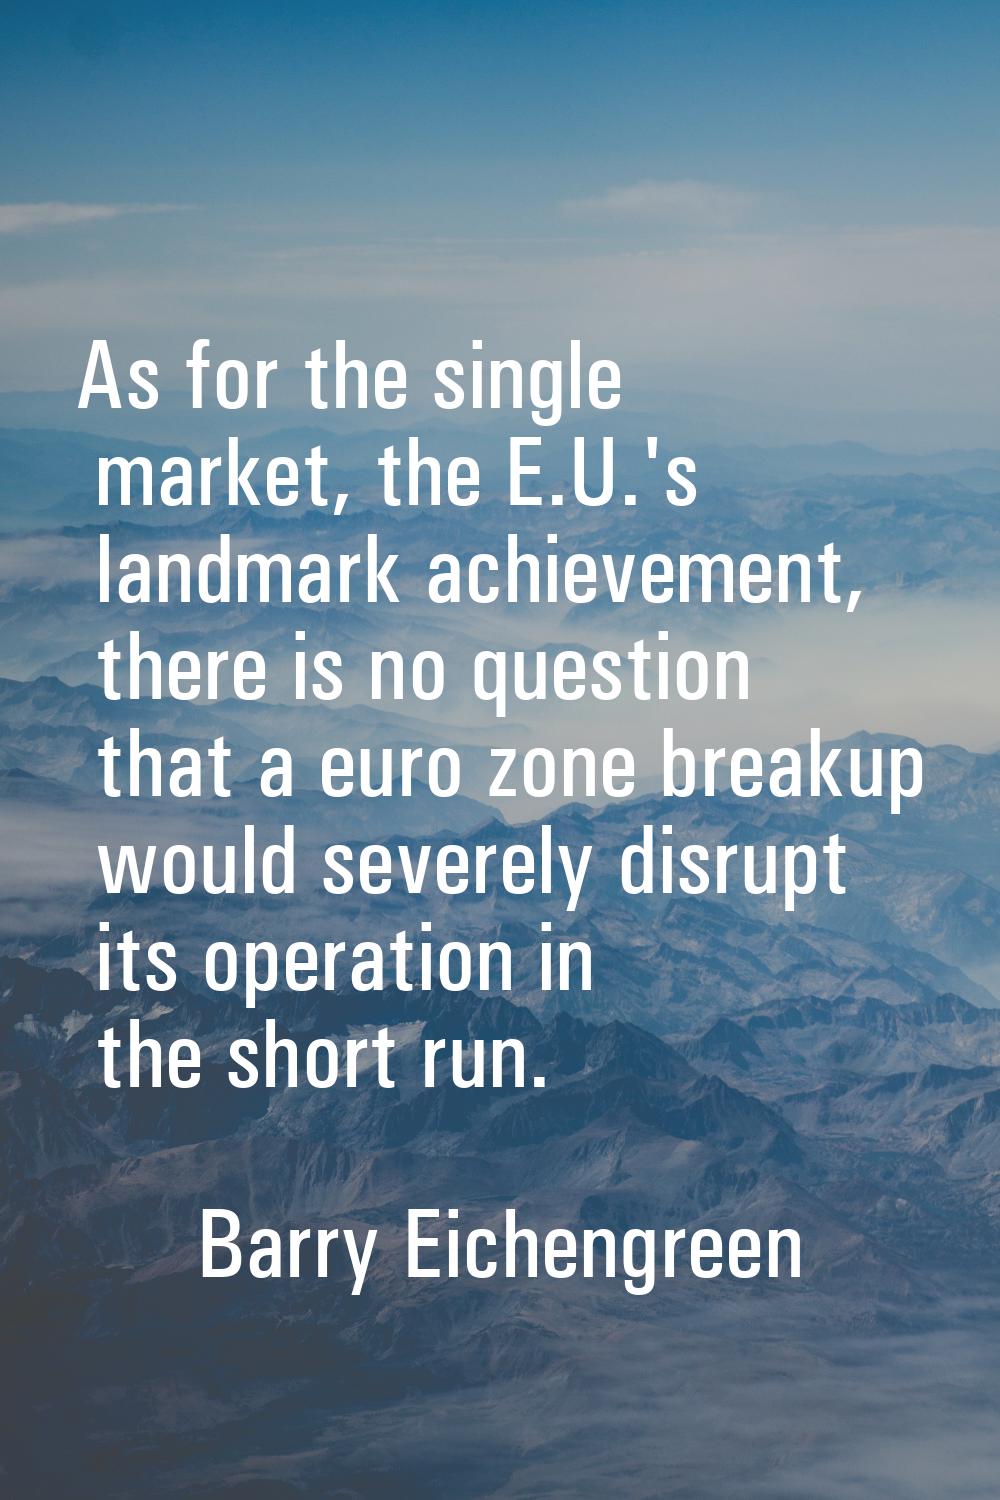 As for the single market, the E.U.'s landmark achievement, there is no question that a euro zone br